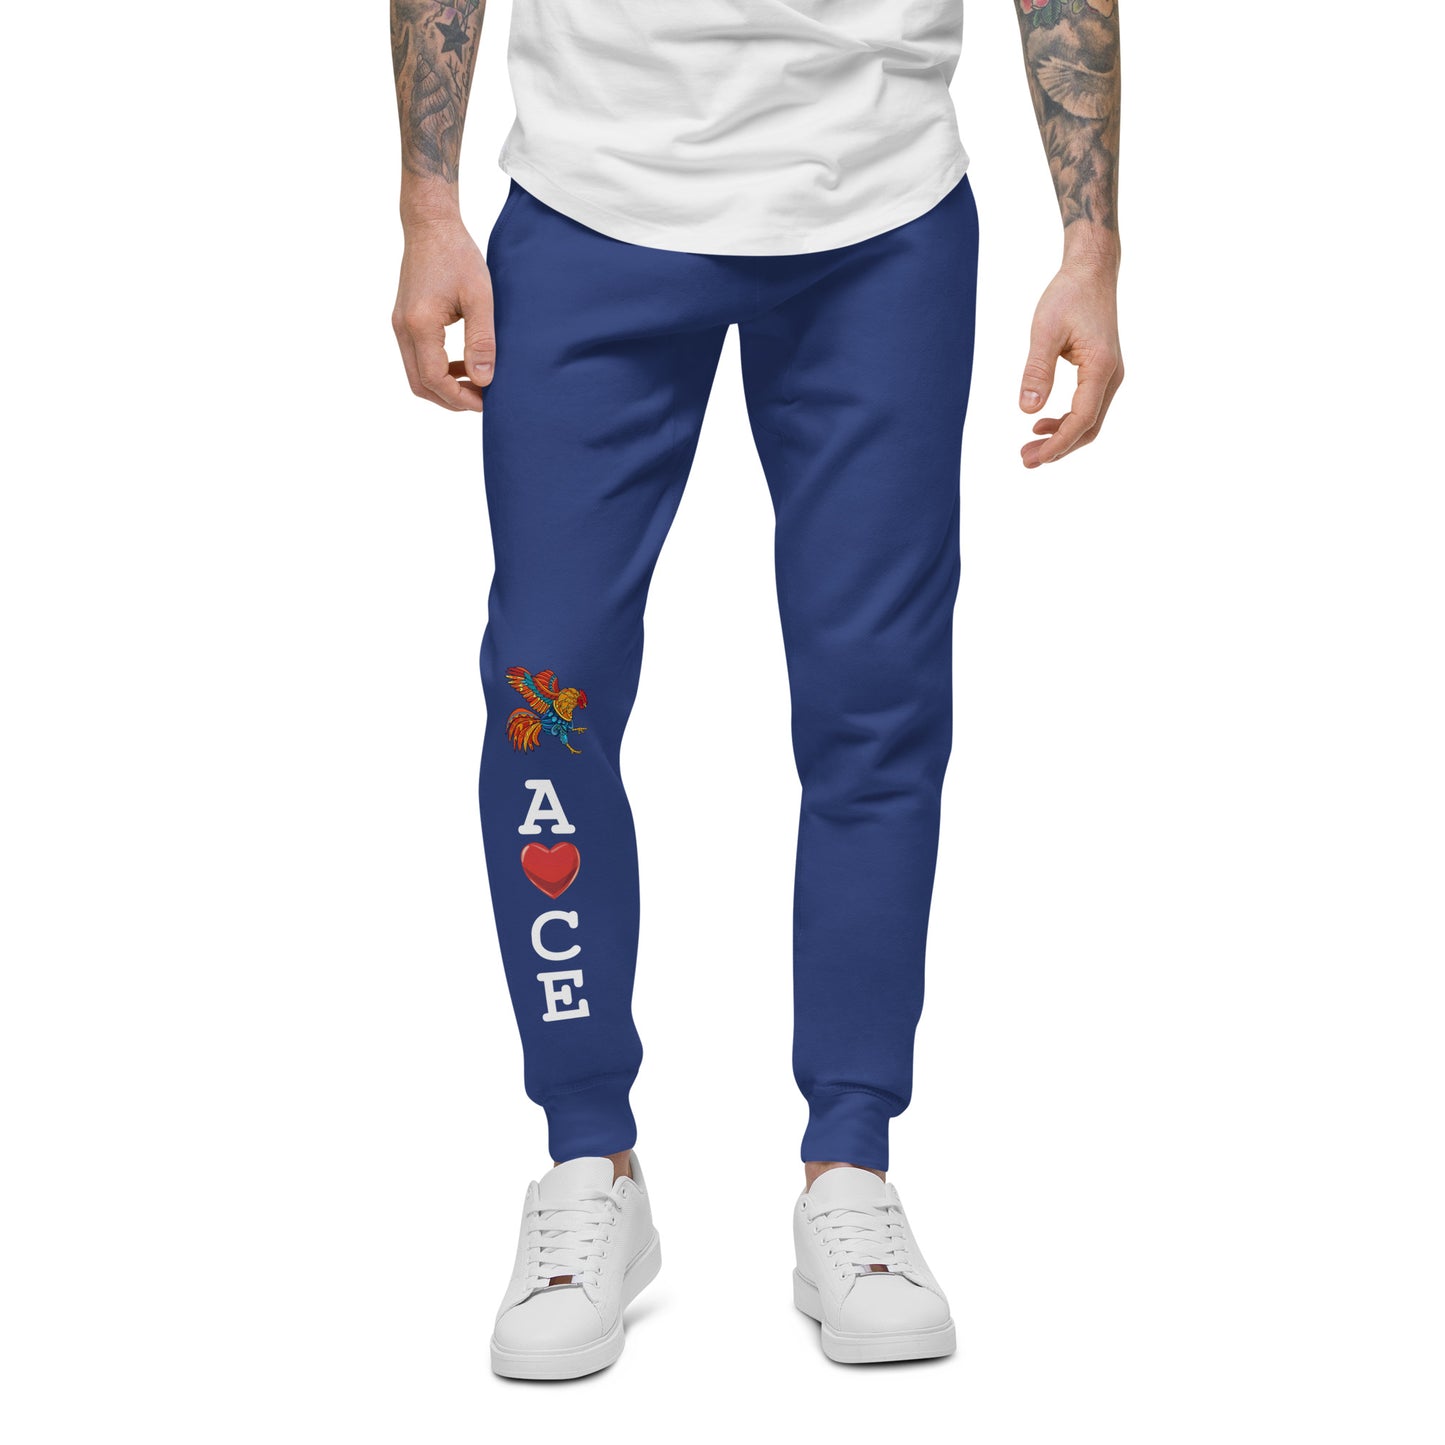 Unisex DECK OF CARDS ACE Gamefowl Rooster Sweatpants